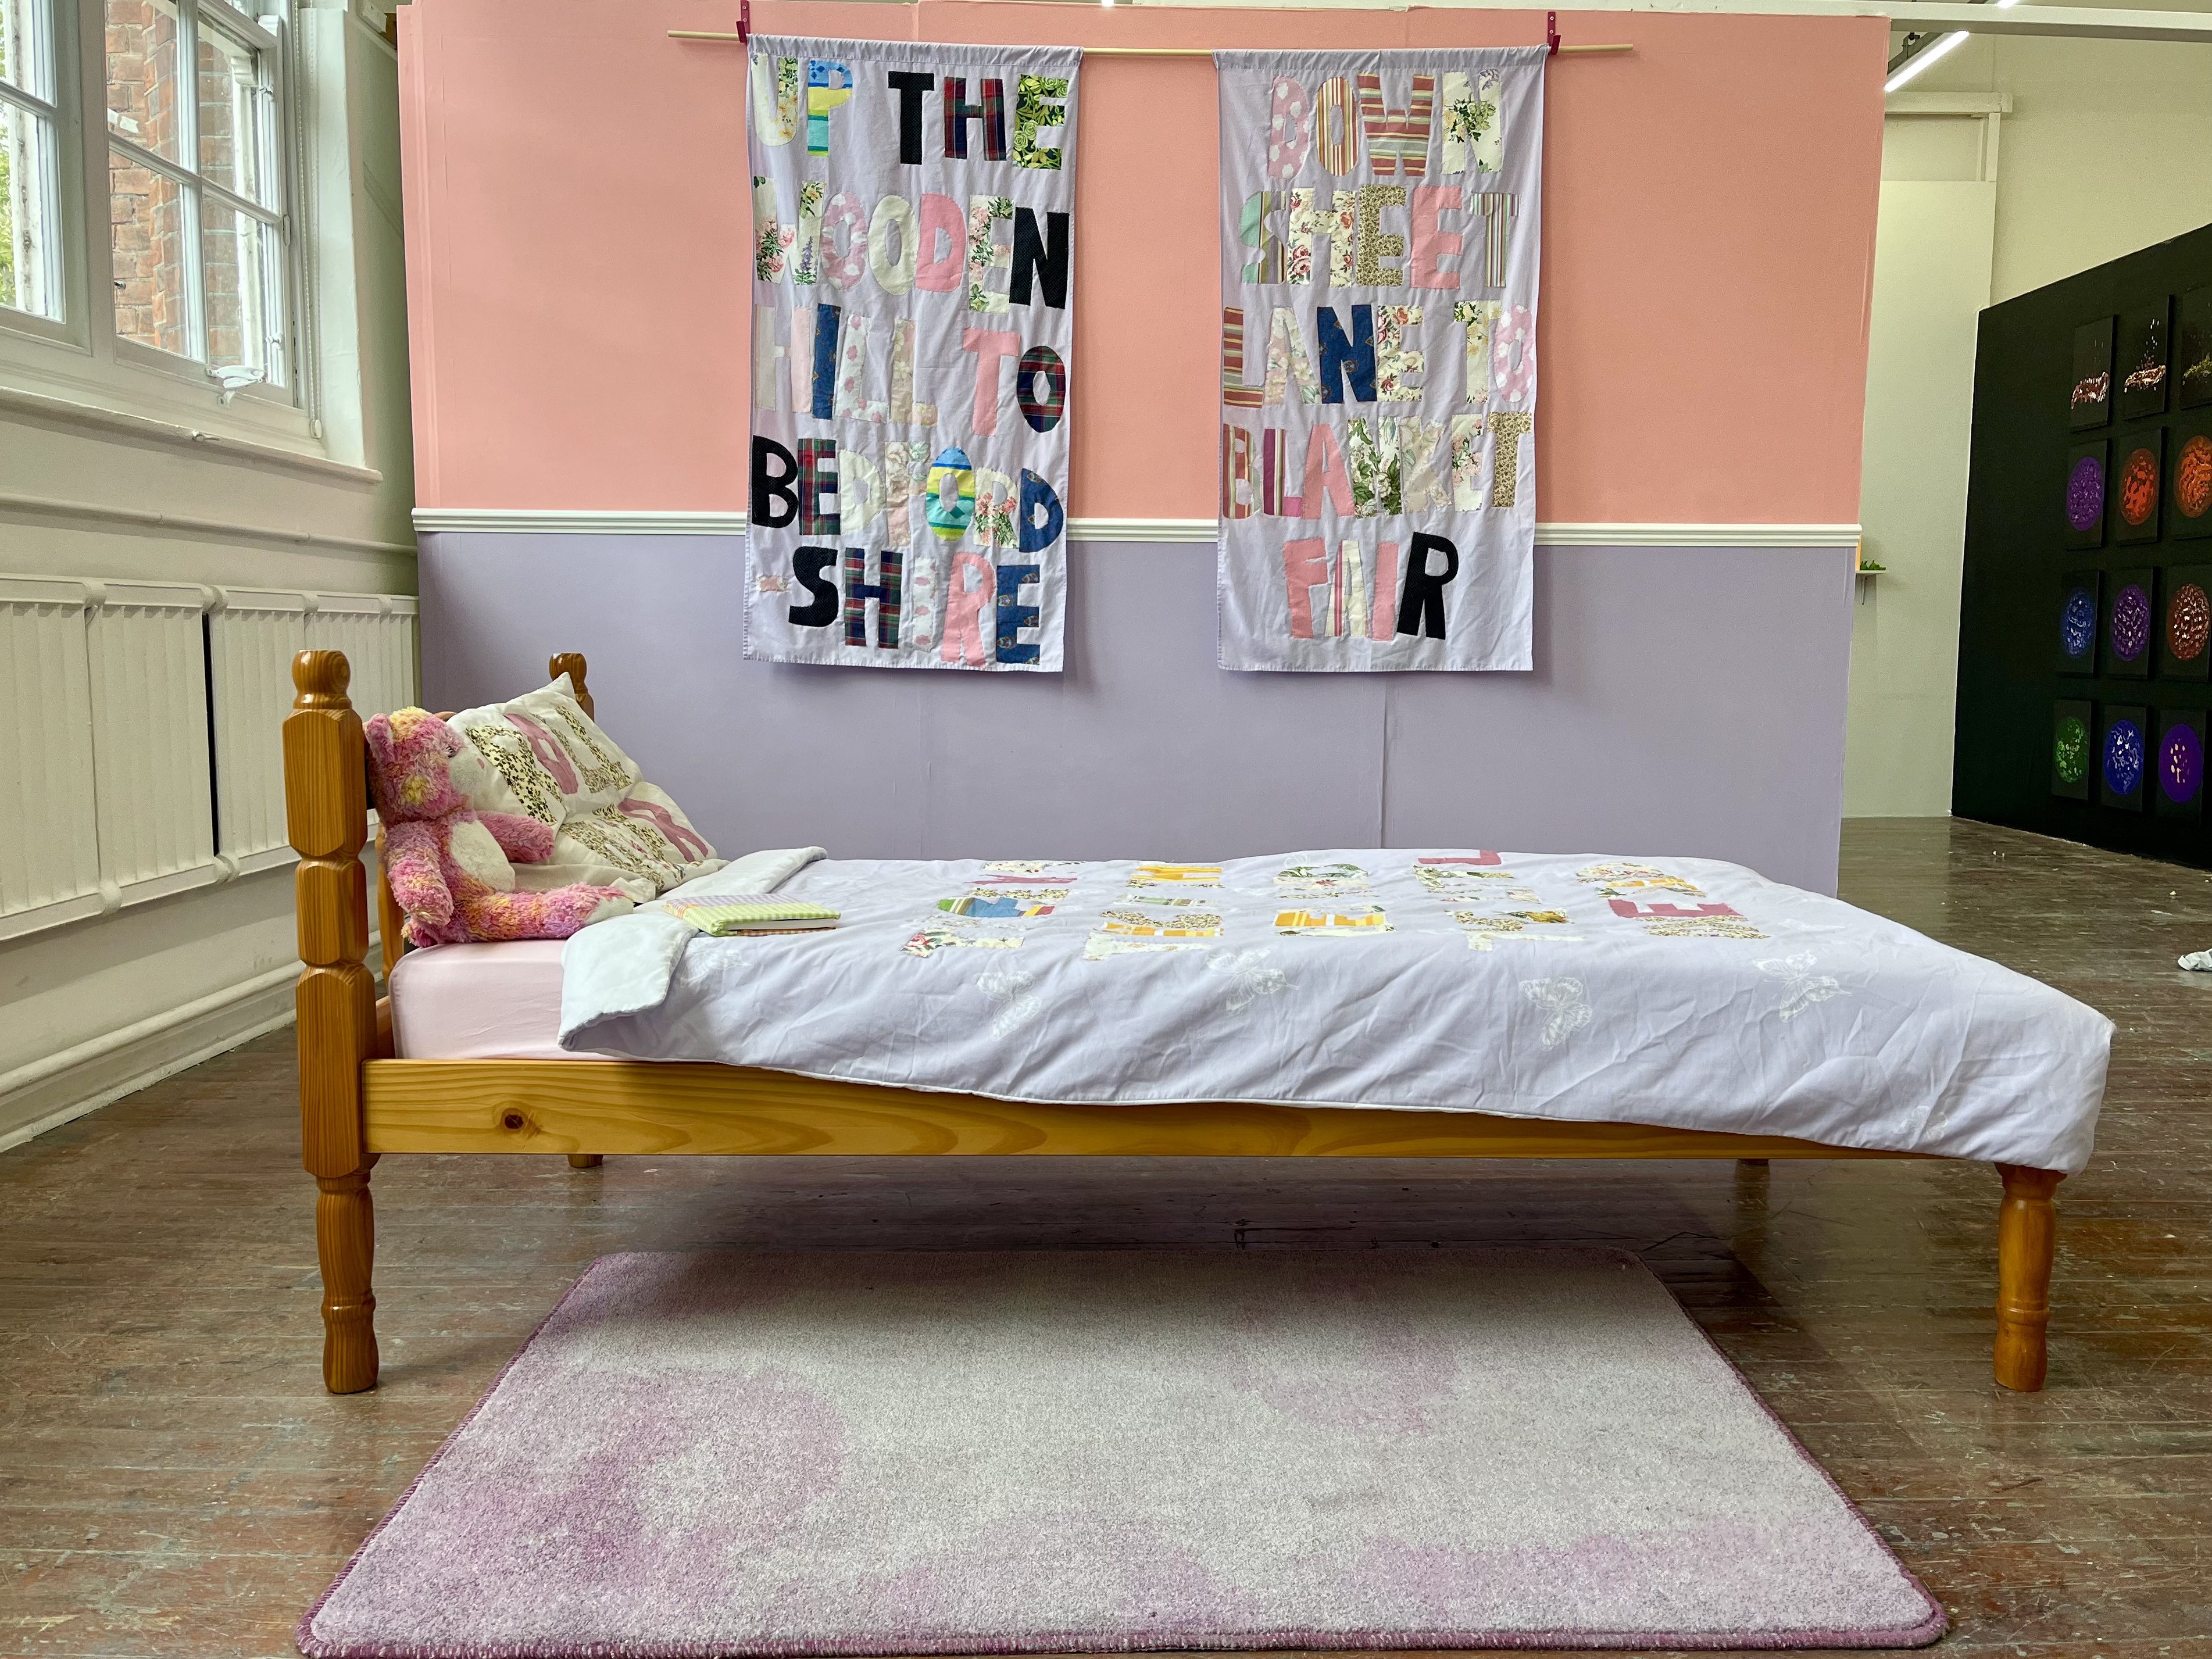 Installation by Amber-Rose Thorpe, a bed is in the foreground and a pink and purple wall is in the background. There is text on textile hangings throughout.